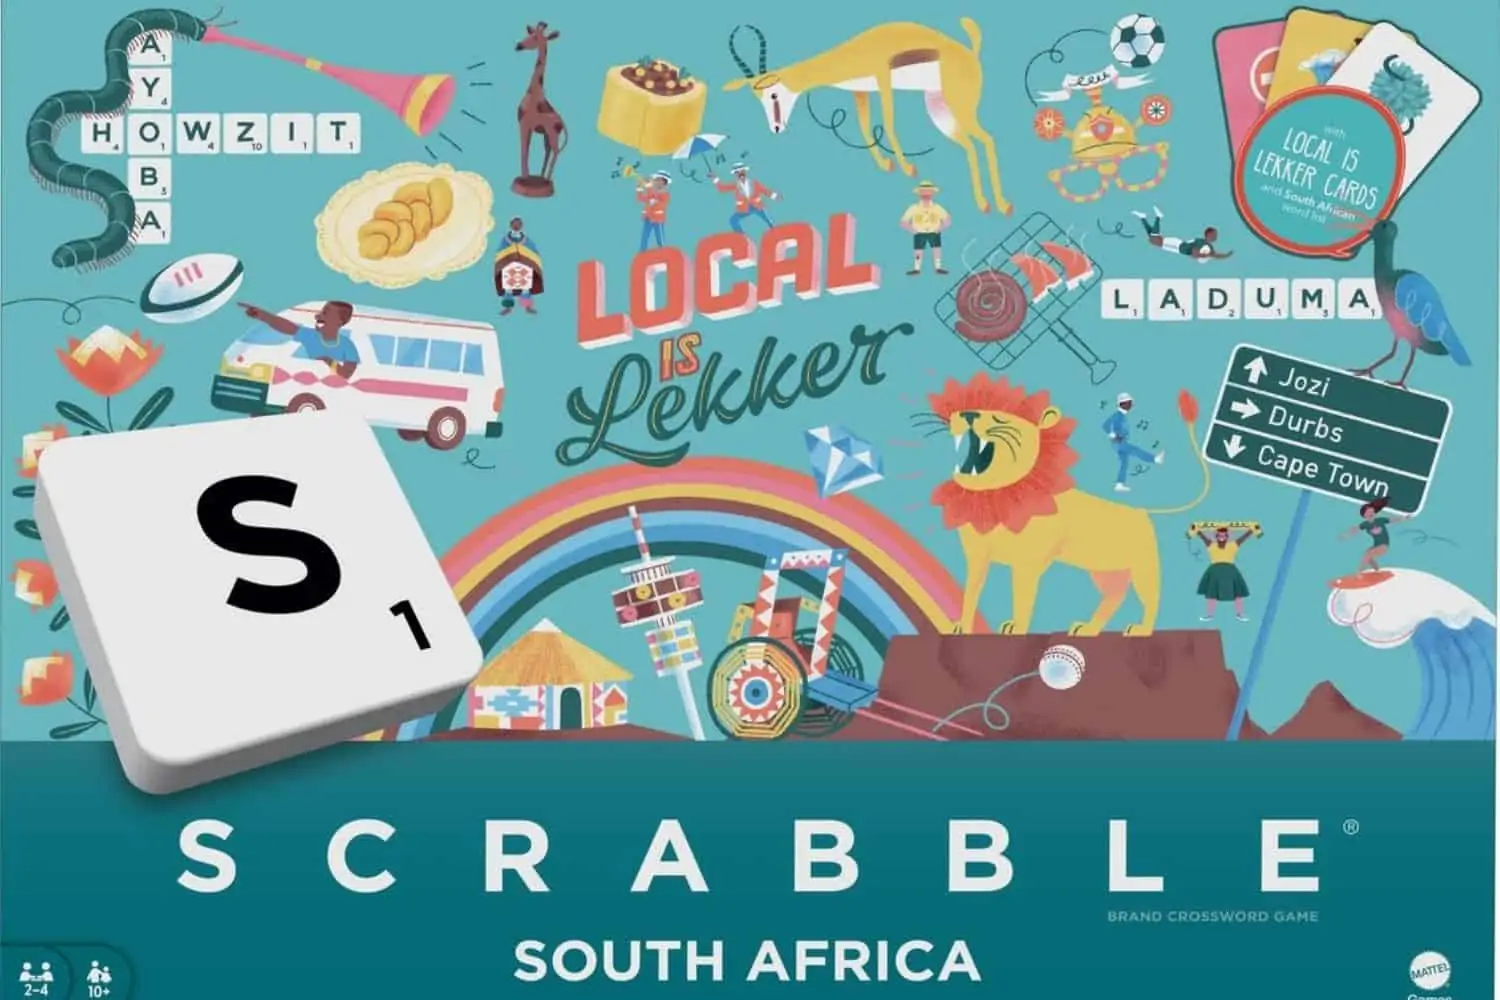 Howzit Scrabble, welcome to South Africa